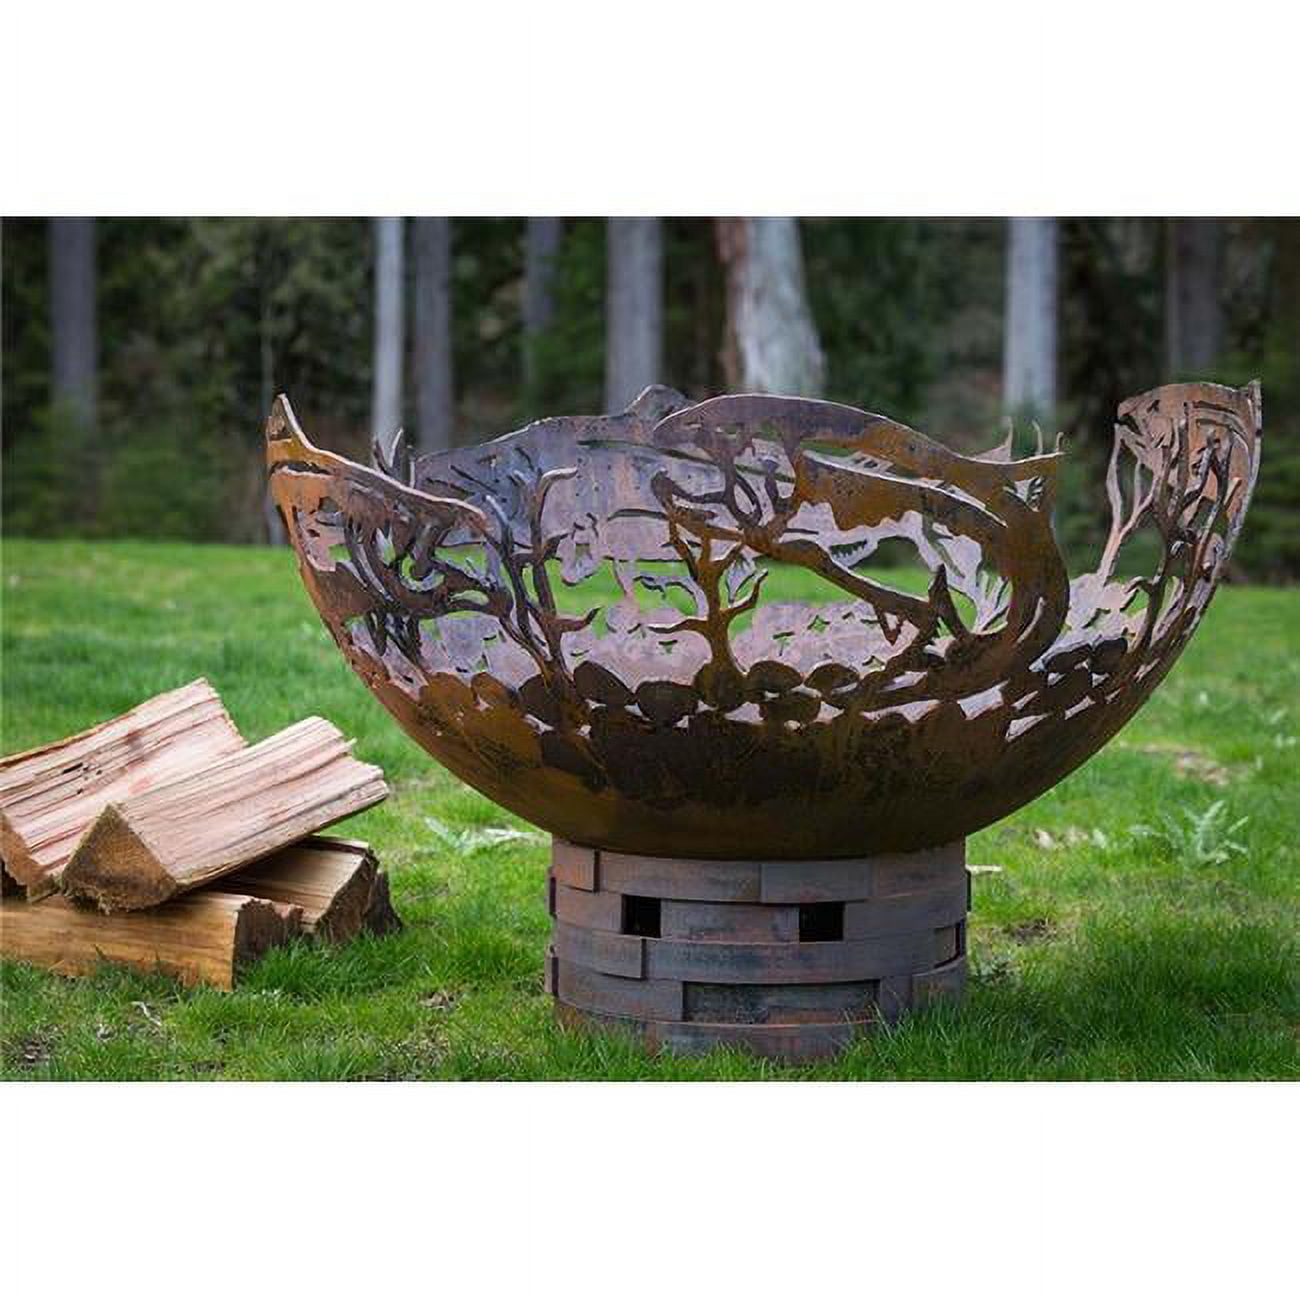 20005-ngei Salmon Fire Pit - Natural Gas With Electronic Ignition